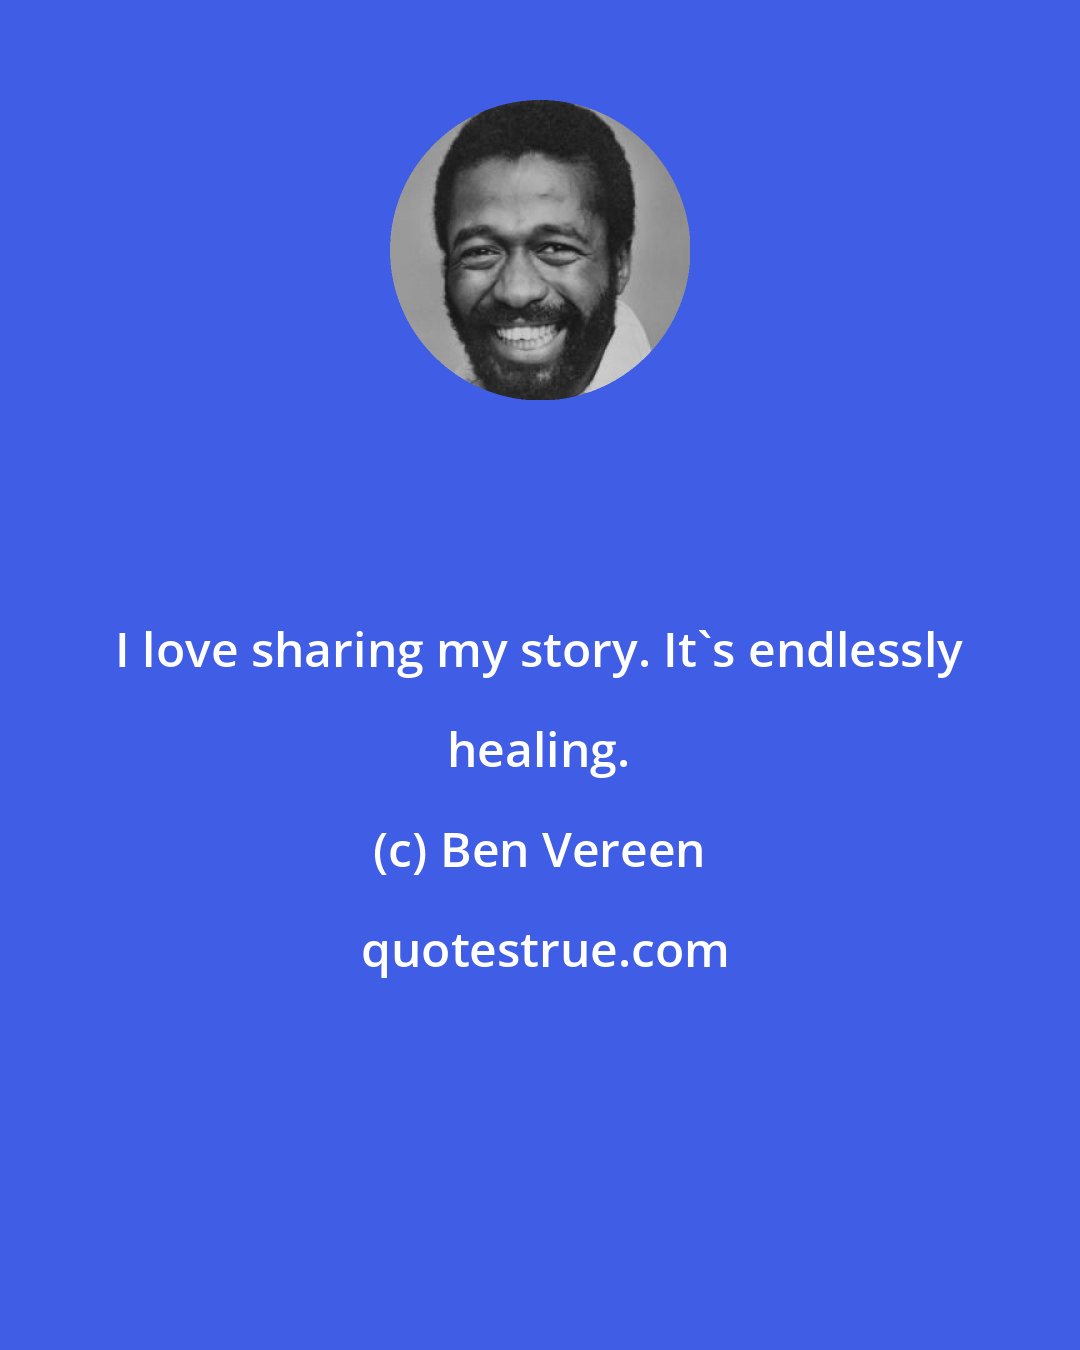 Ben Vereen: I love sharing my story. It's endlessly healing.